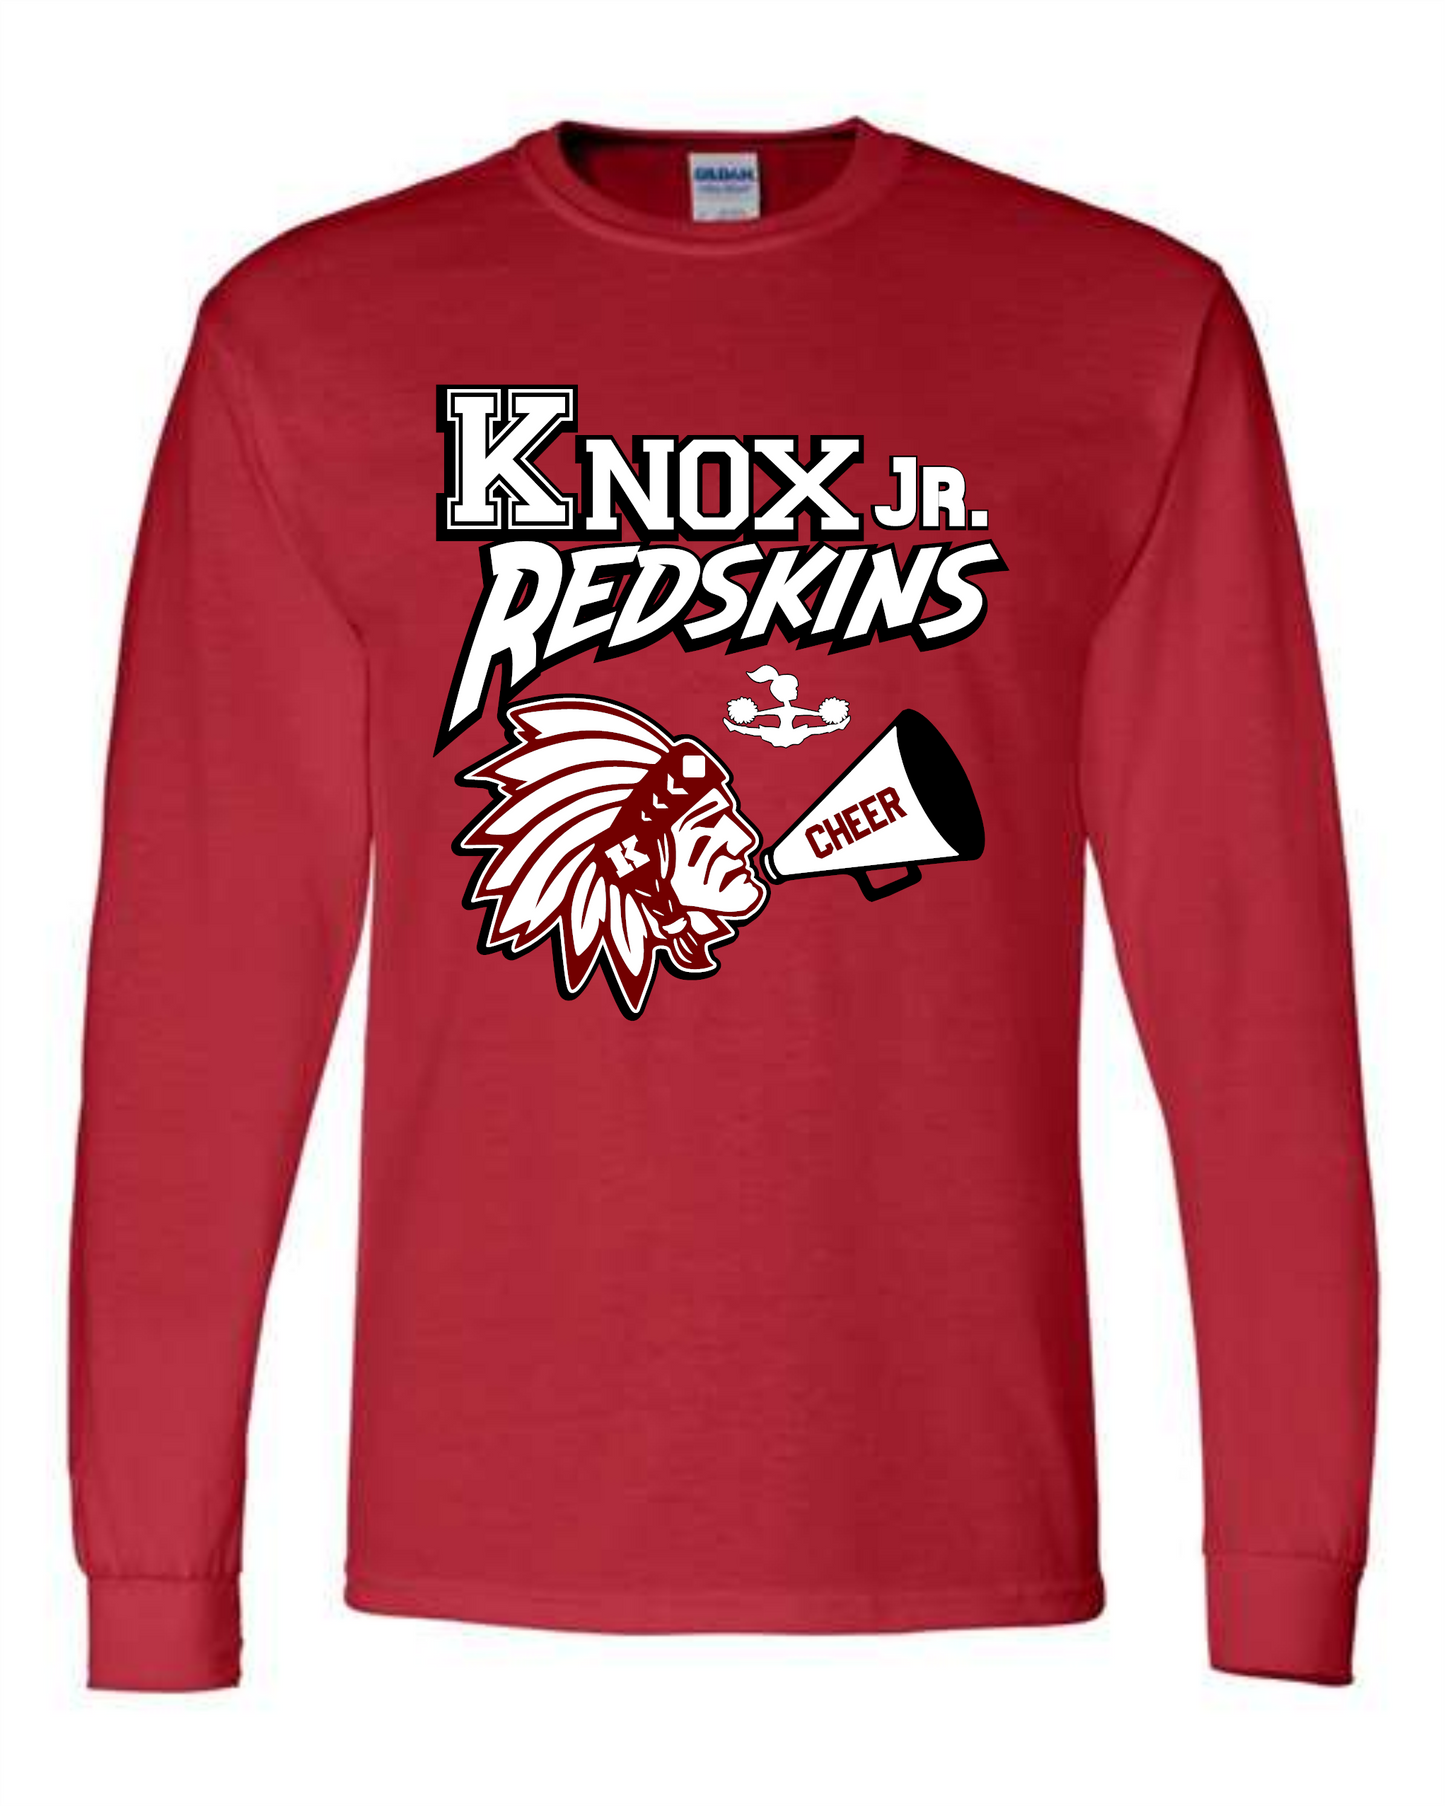 Cheer Knox Jr. Redskins Long Sleeve T - Red - Adult and Youth Sizes